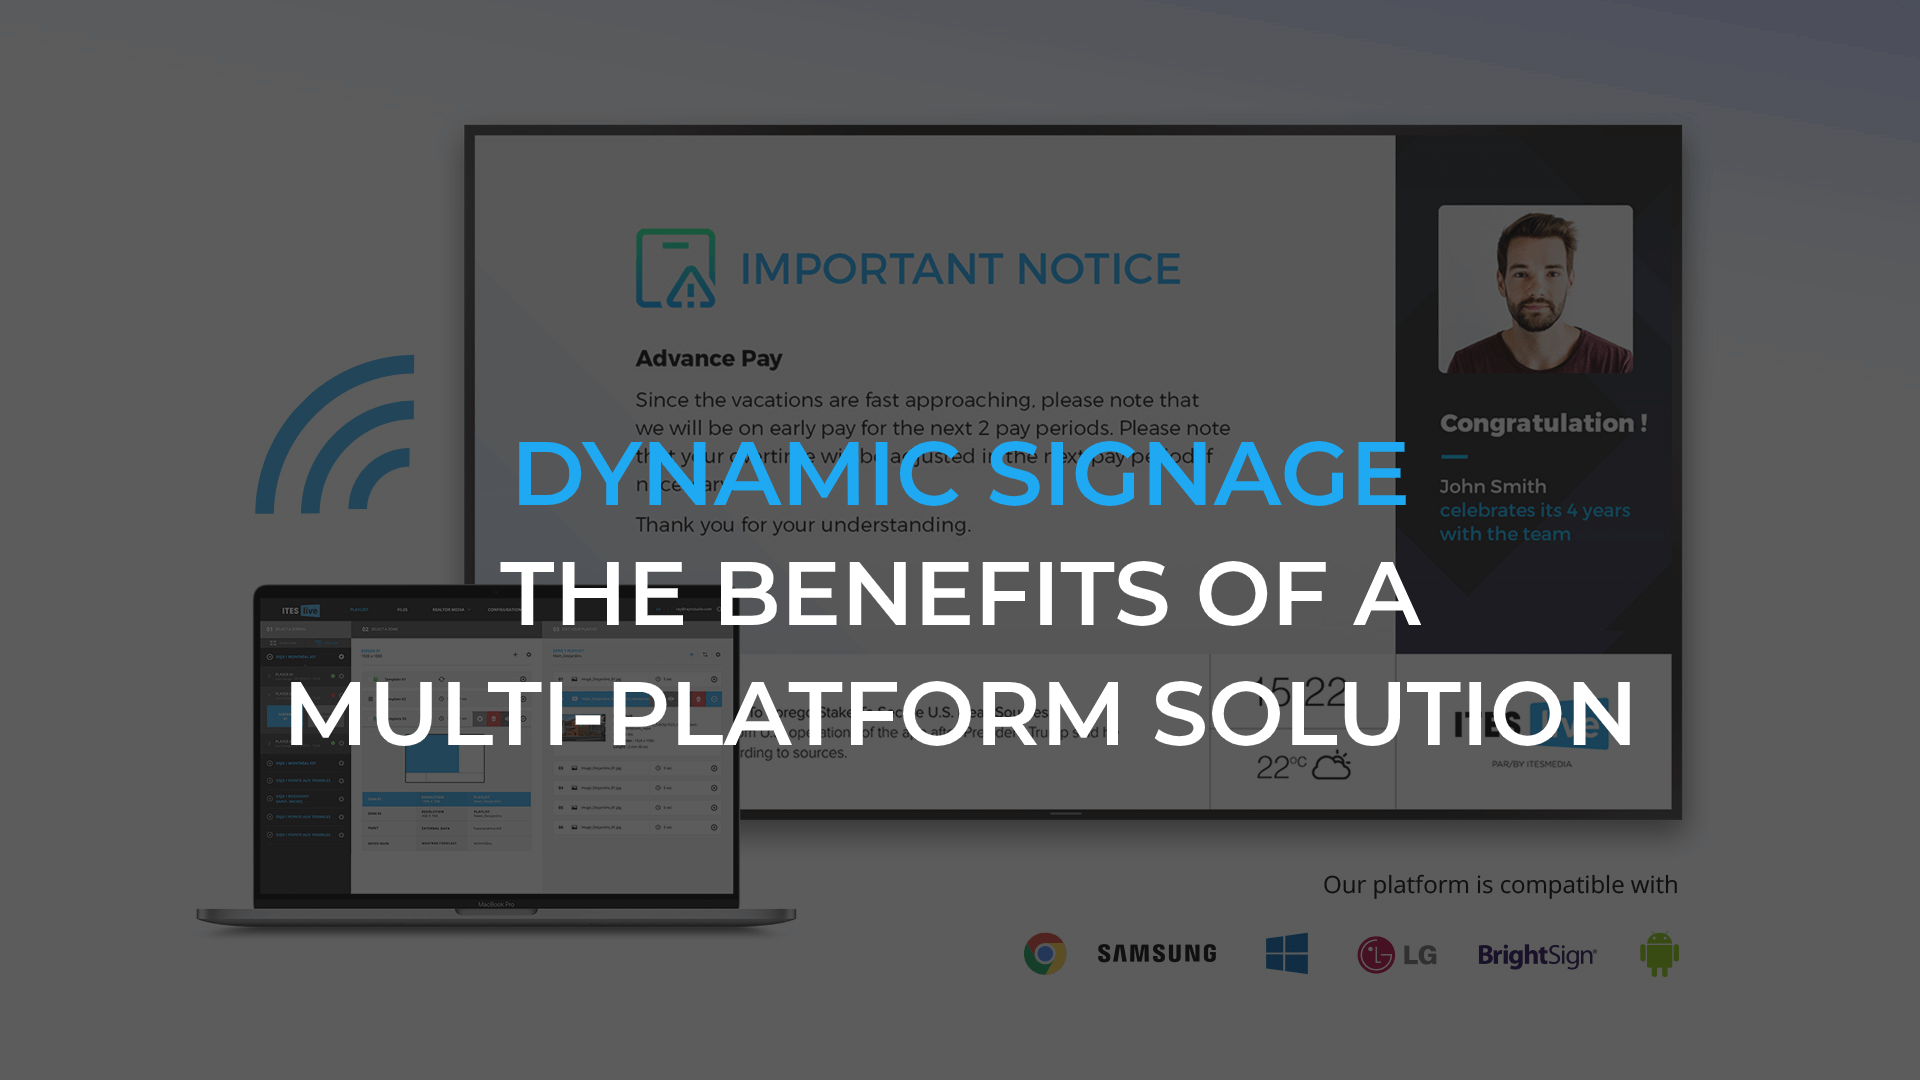 Dynamic signage: The benefits of a multi-platform solution